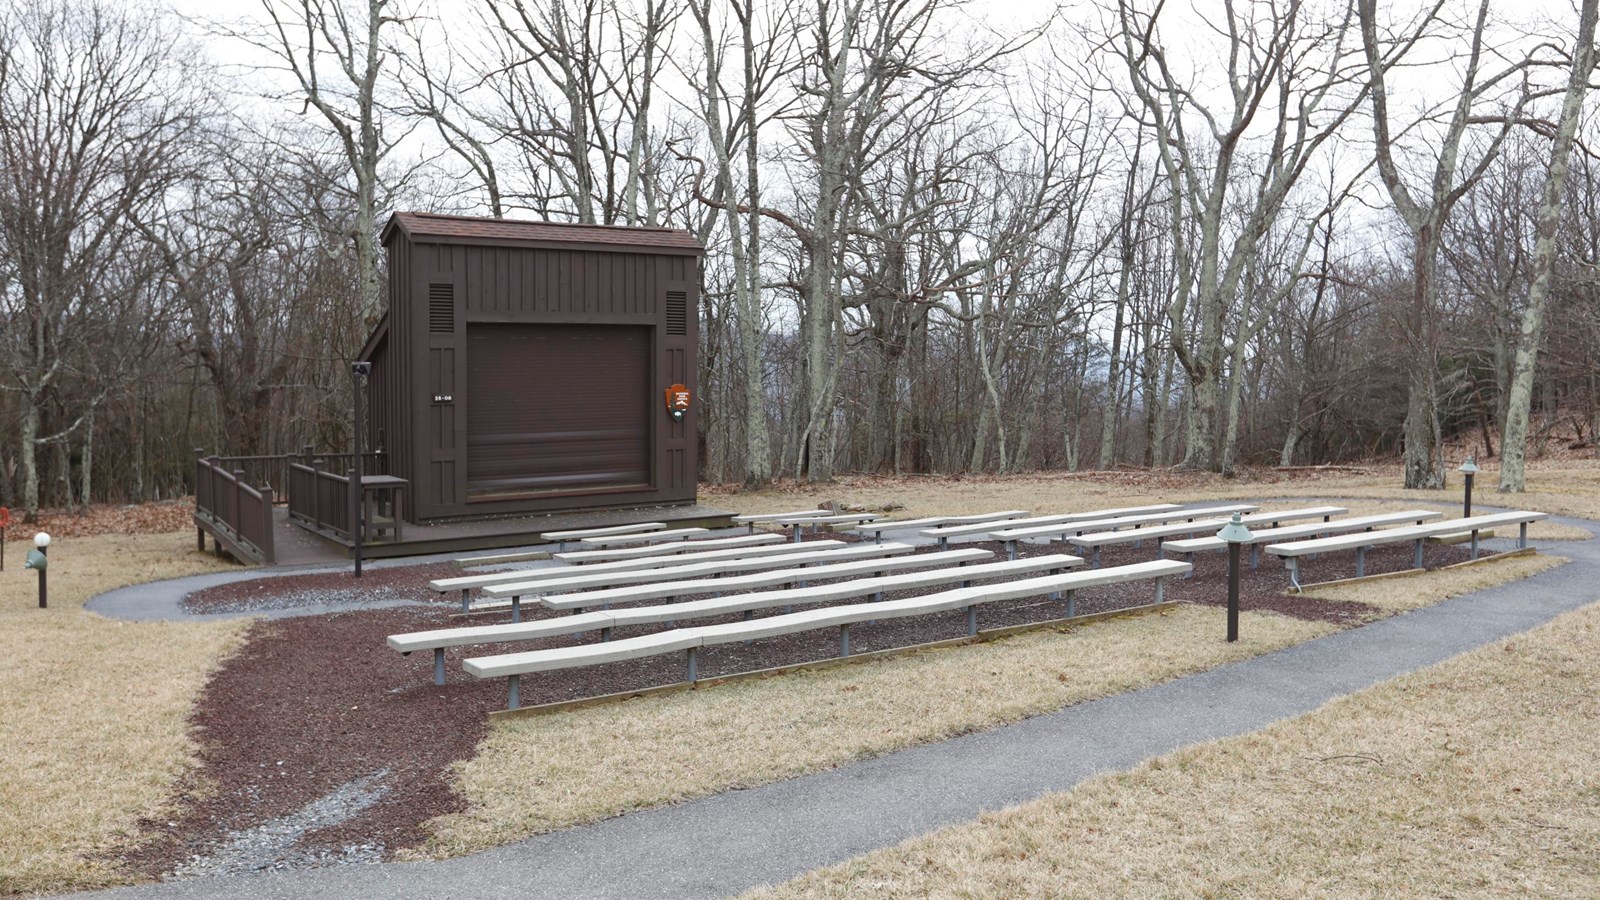 A color photograph of an amphitheater with benches facing a wood-paneled building.